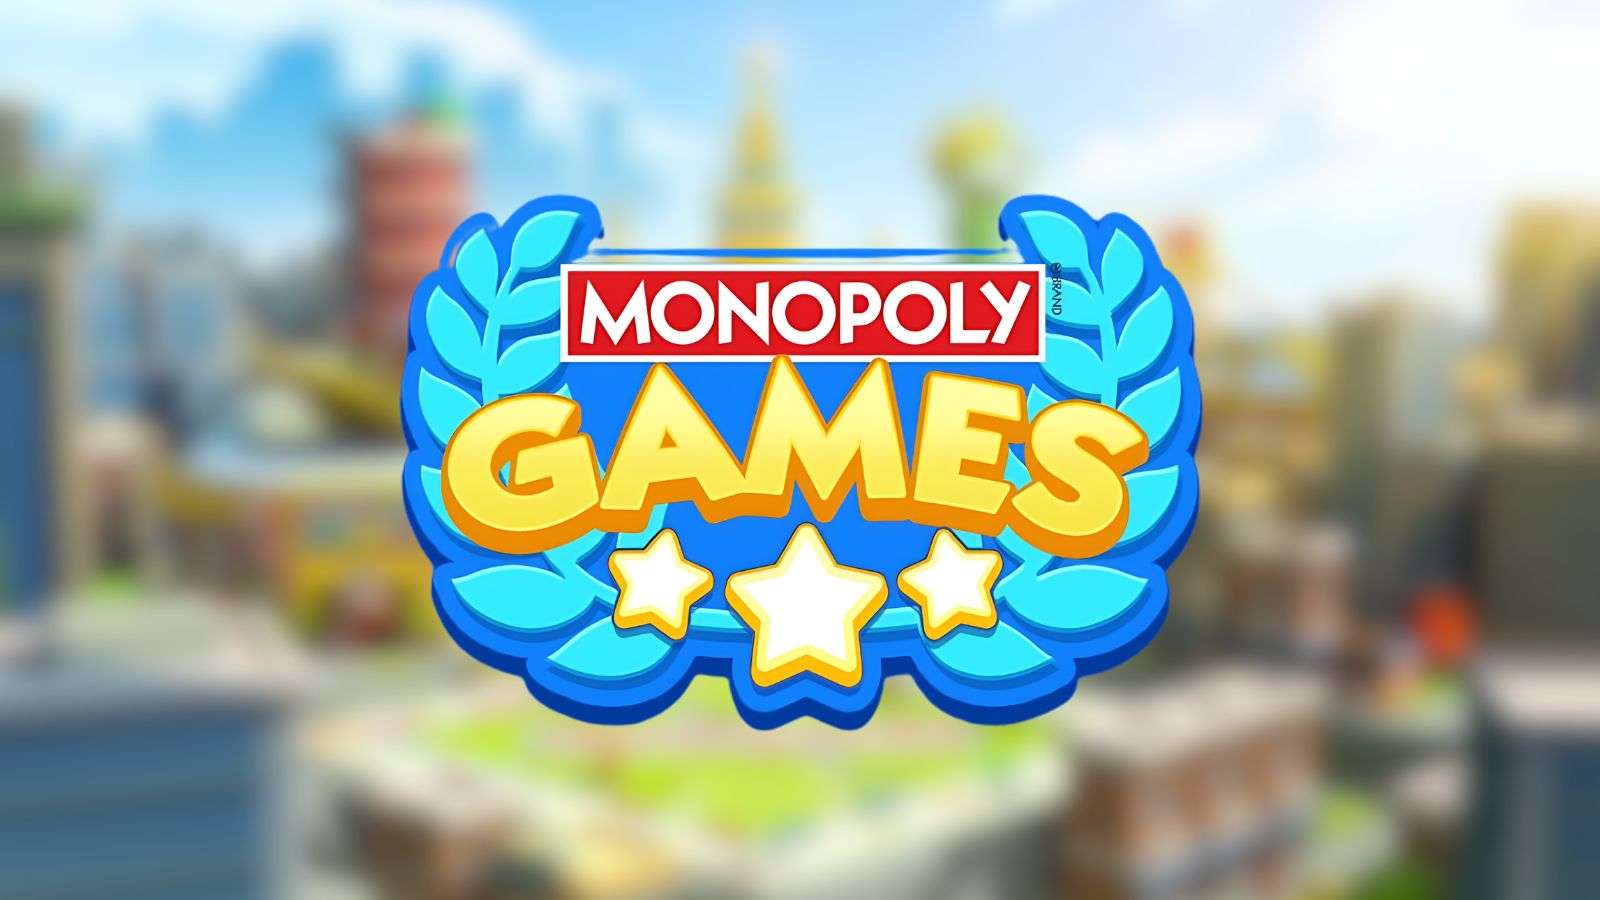 Monopoly Games Stickers challenge, release date, rewards, sets, and more